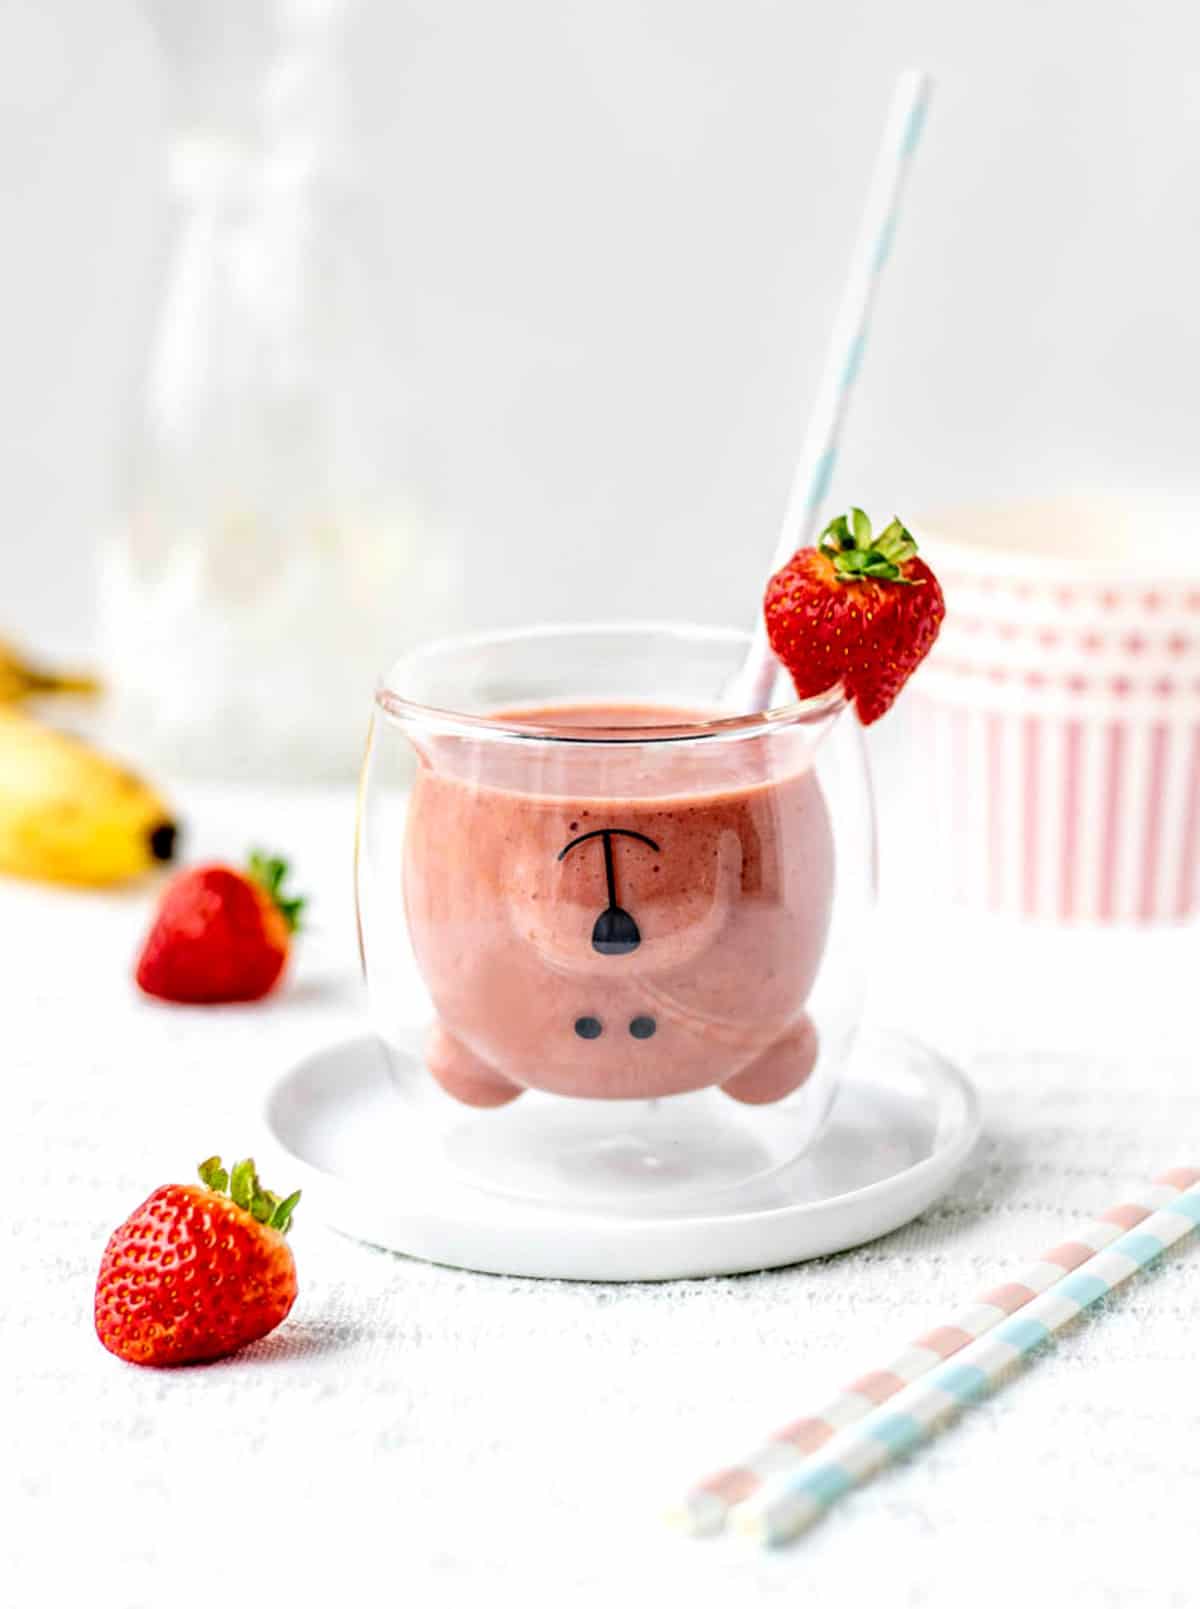 The strawberry banana smoothie without yogurt in a teddy glass with a straw.